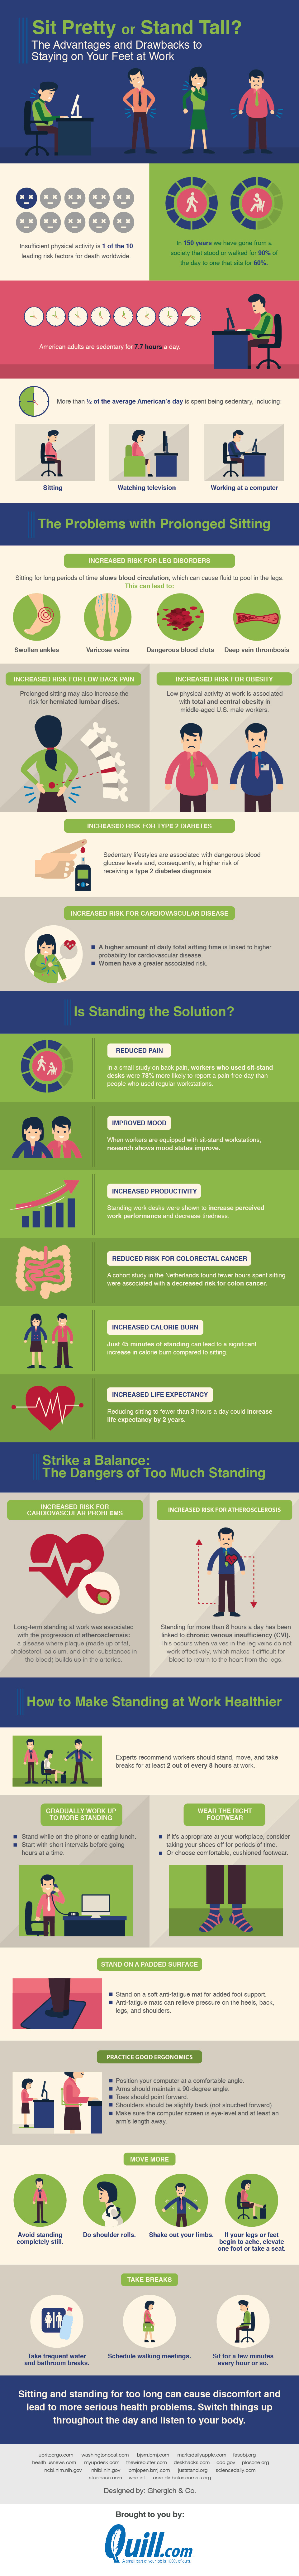 The Advantages and drawbacks to Staying on Your Feet at Work infographic